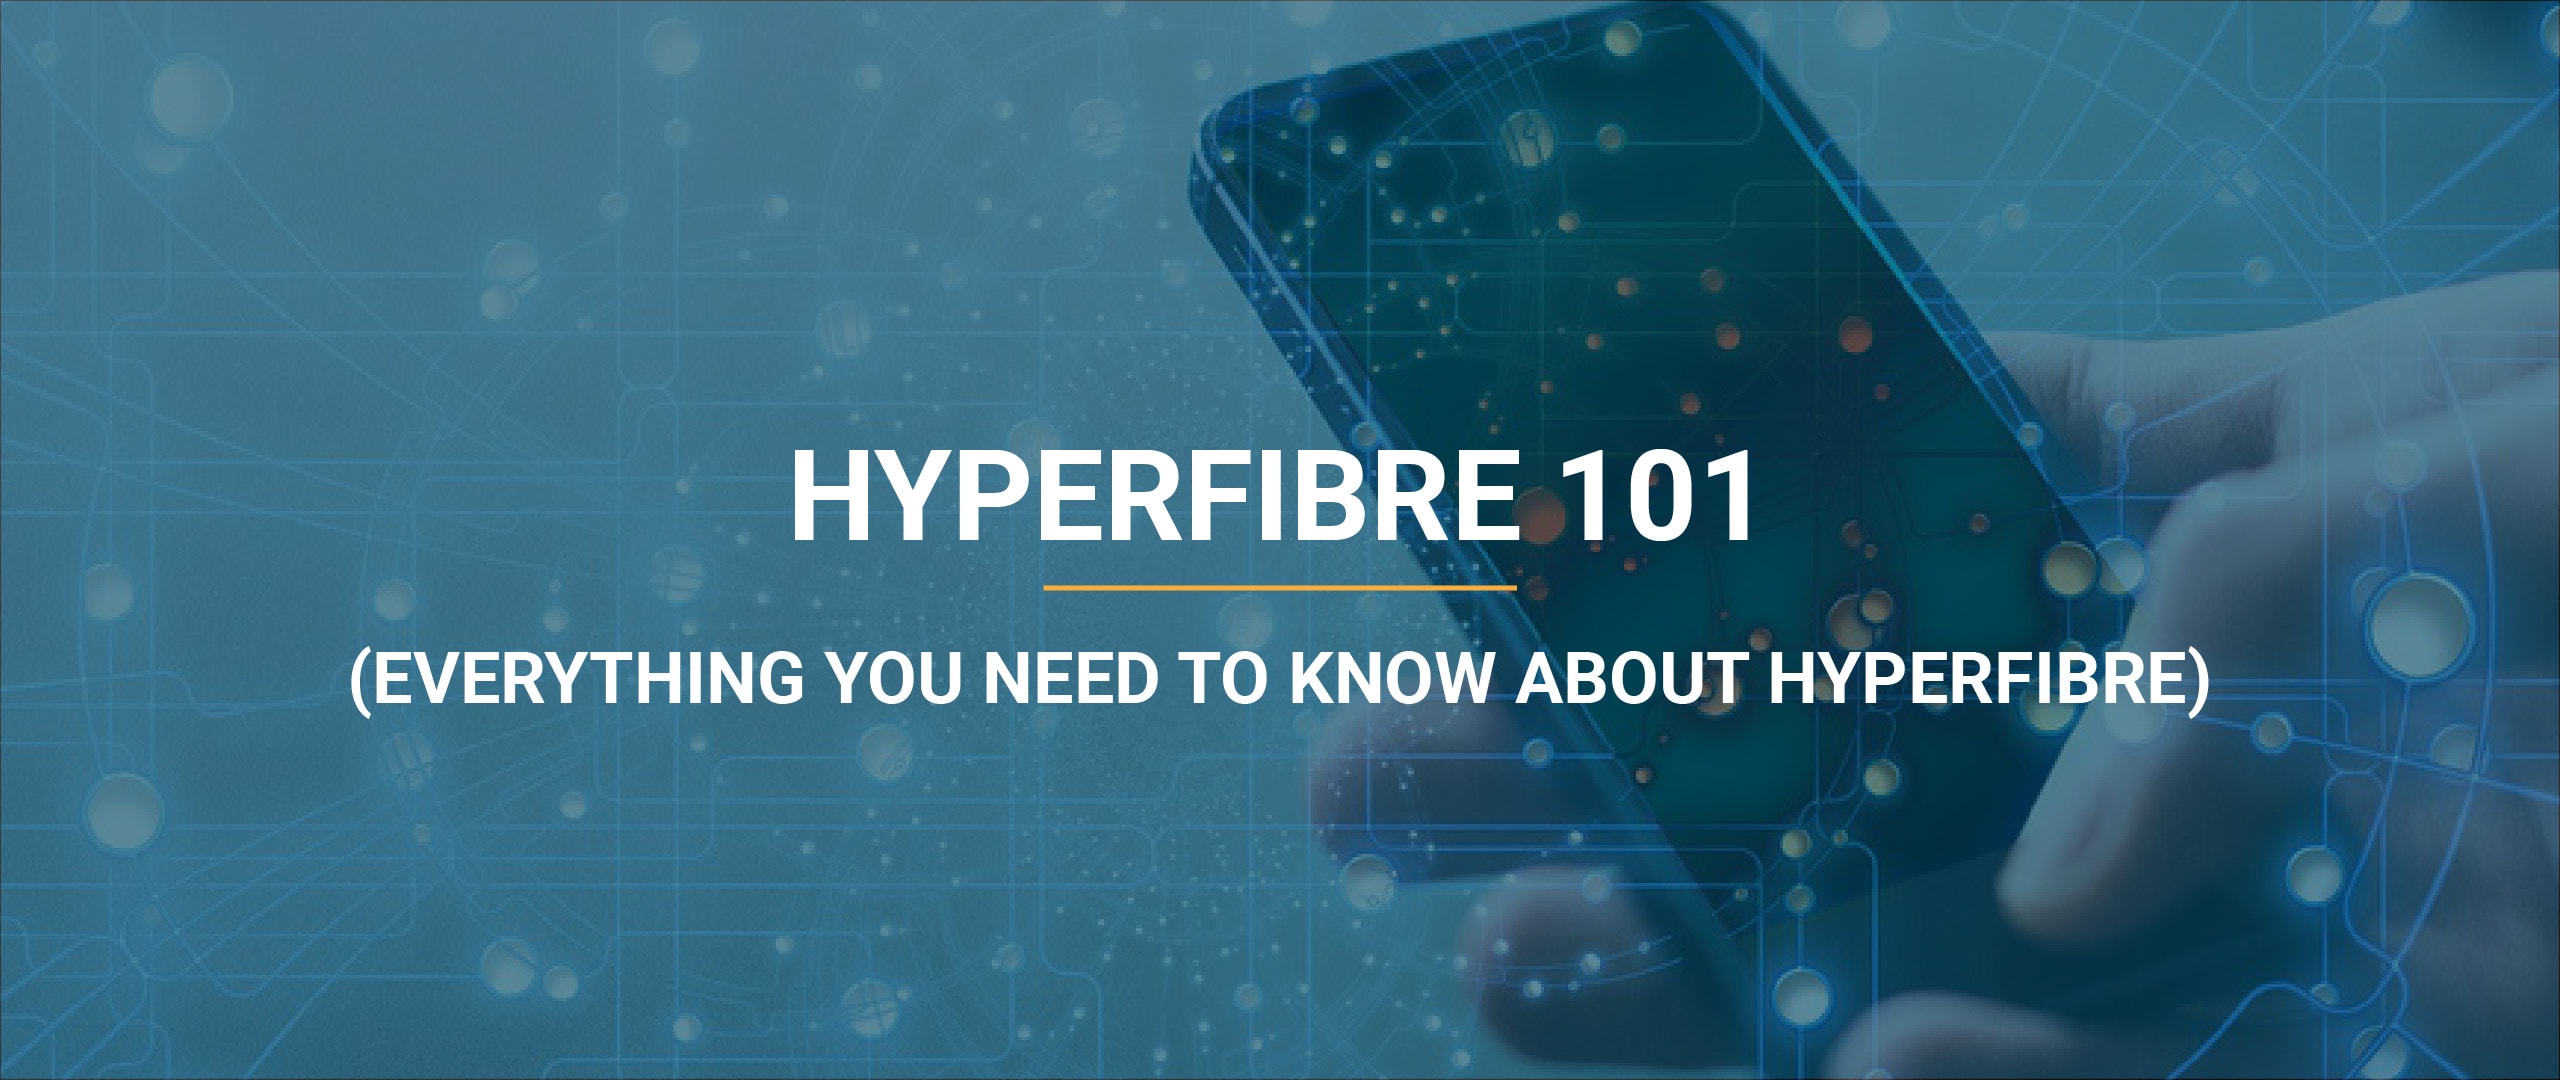 Hyperfibre 101 - Everything you need to know about Hyperfibre